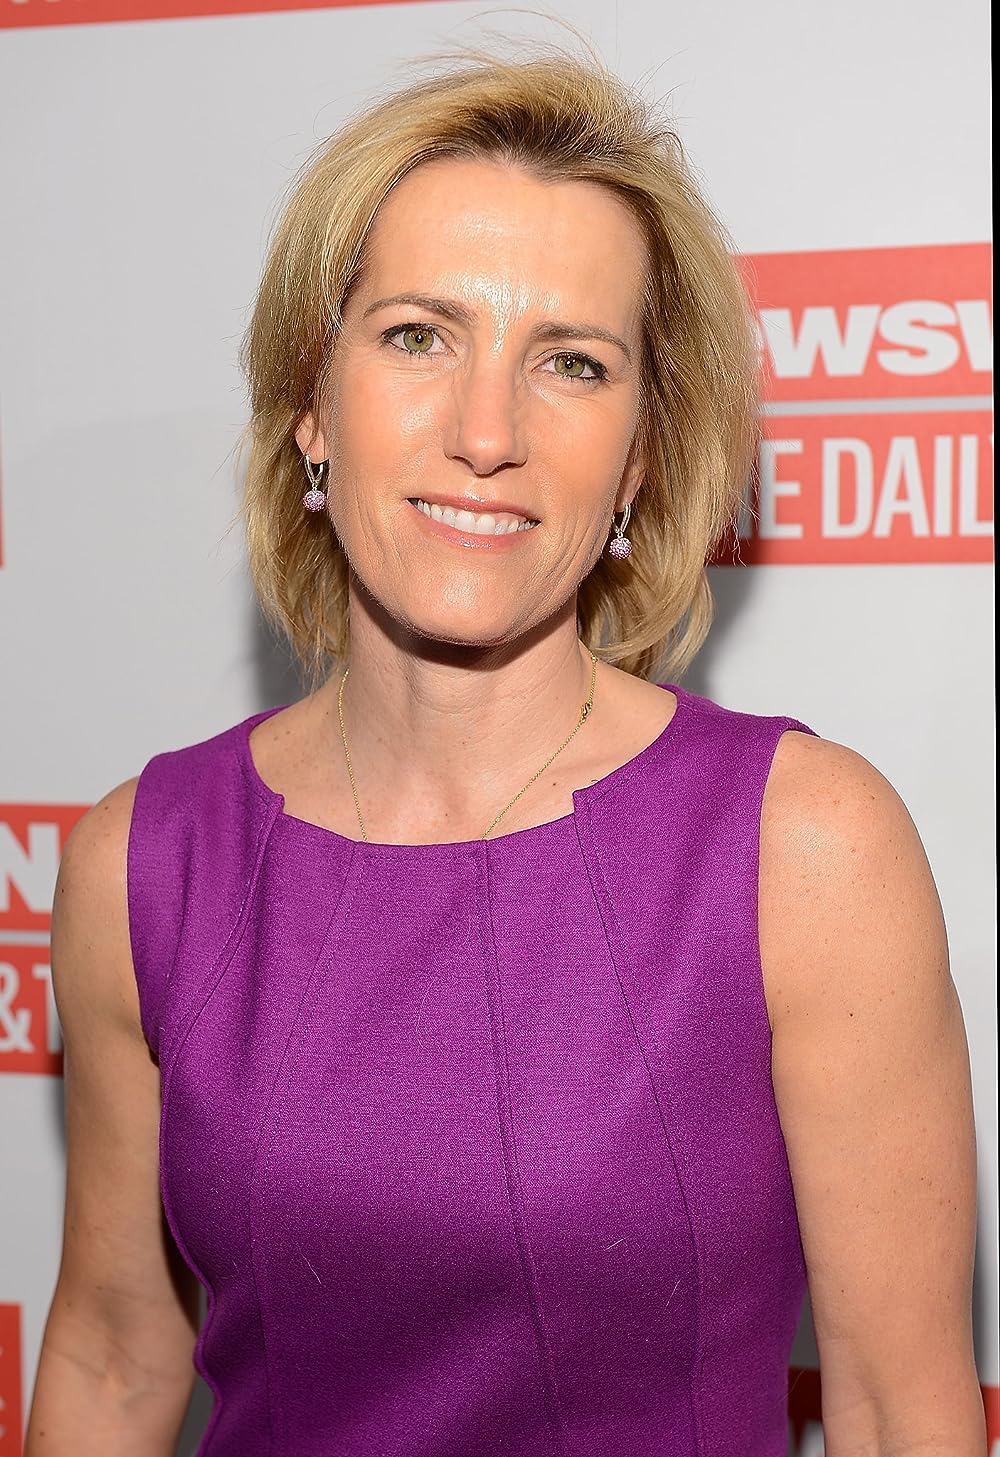 Who Is Laura Ingraham